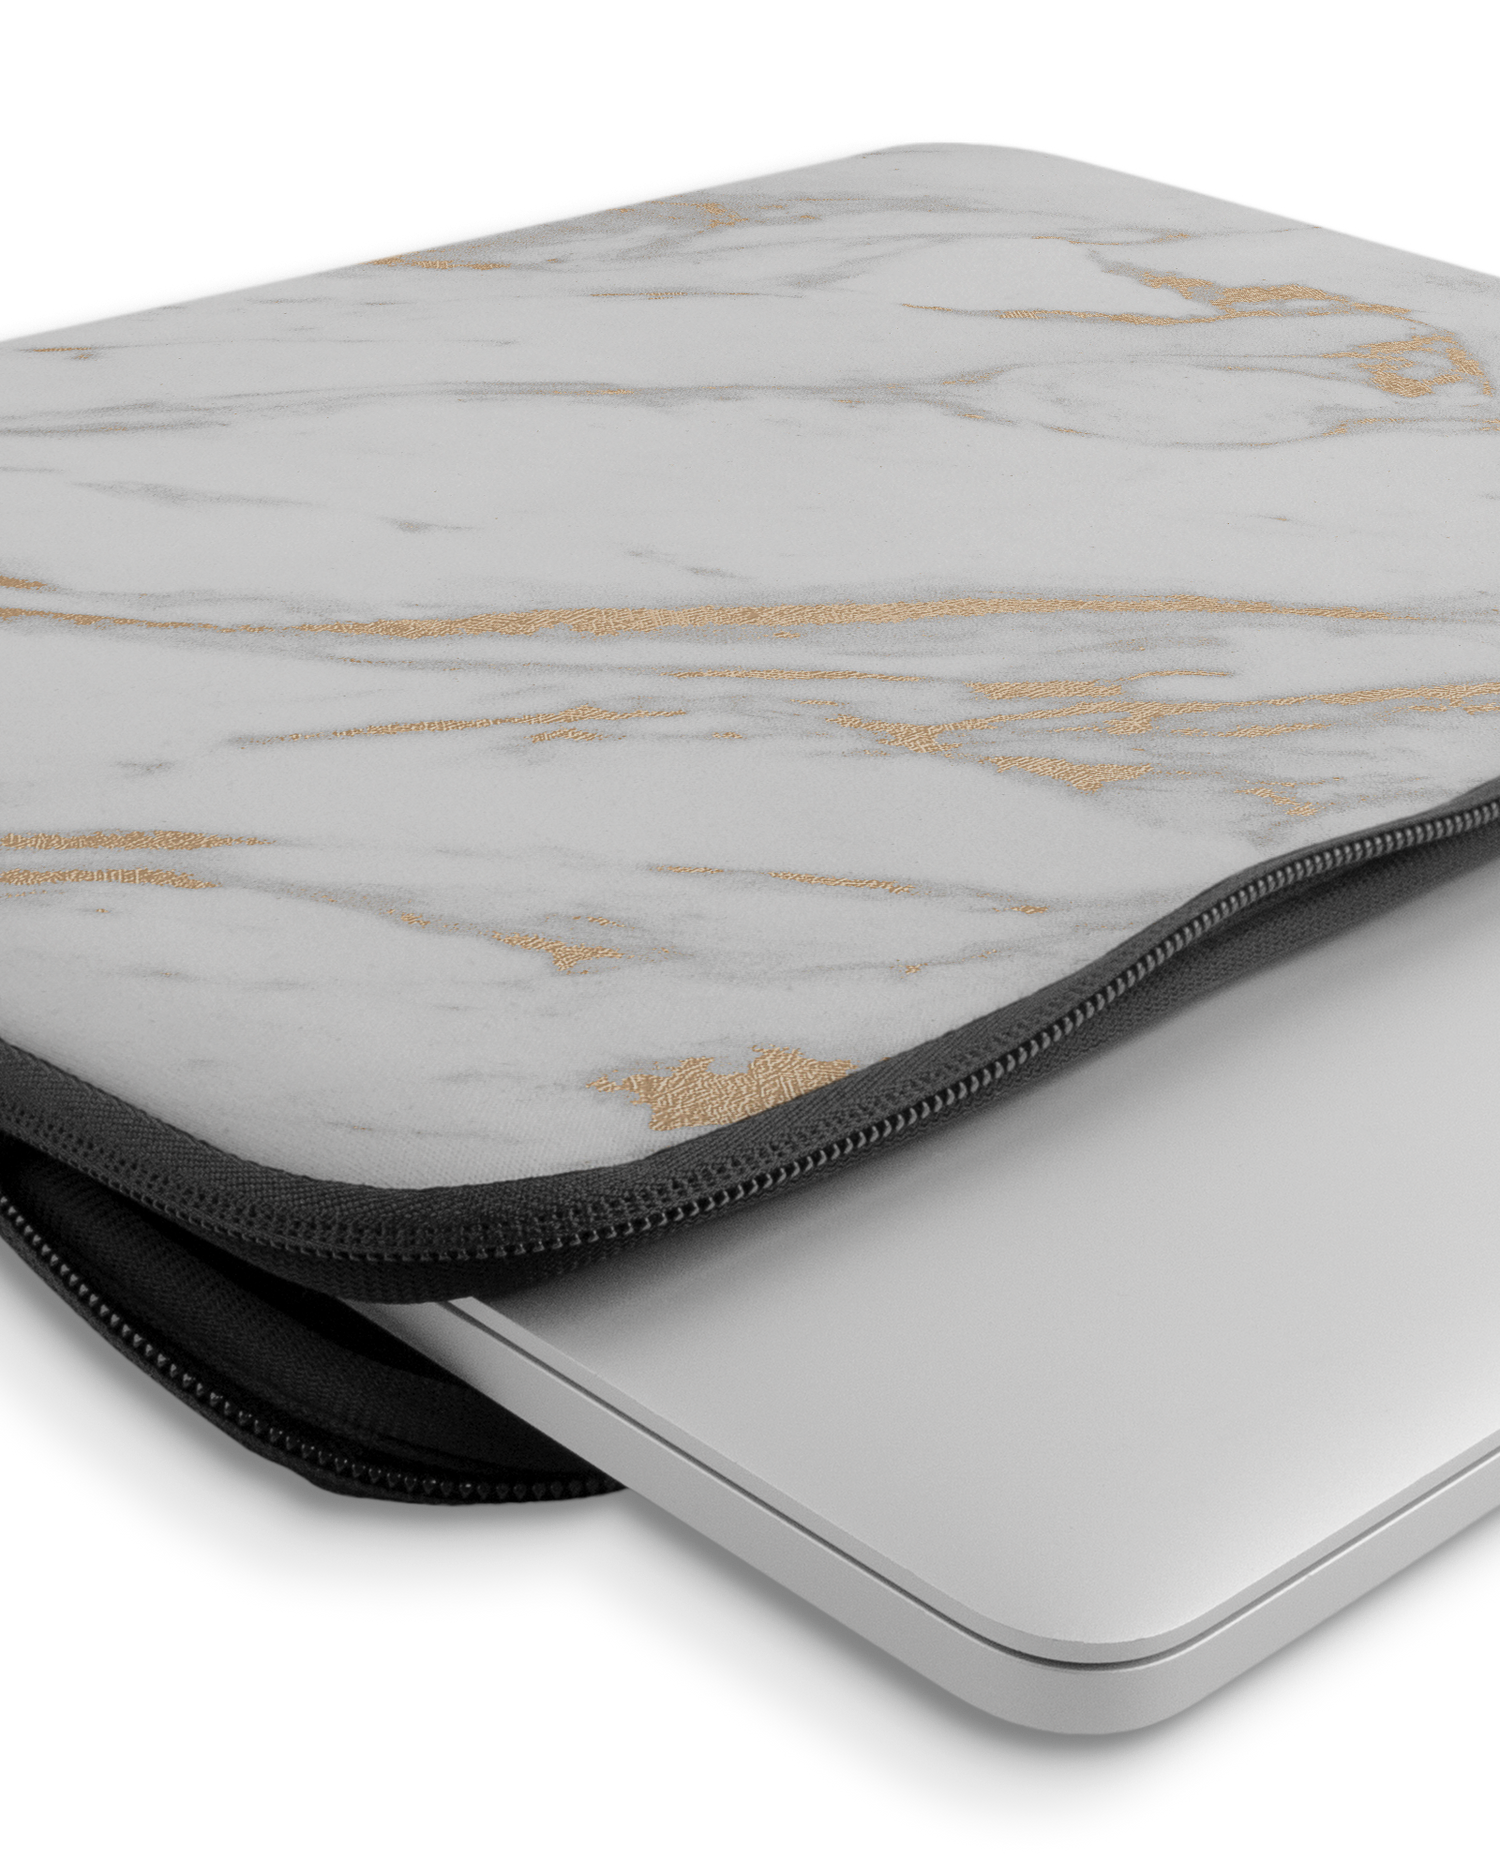 Gold Marble Elegance Laptop Case 14-15 inch with device inside